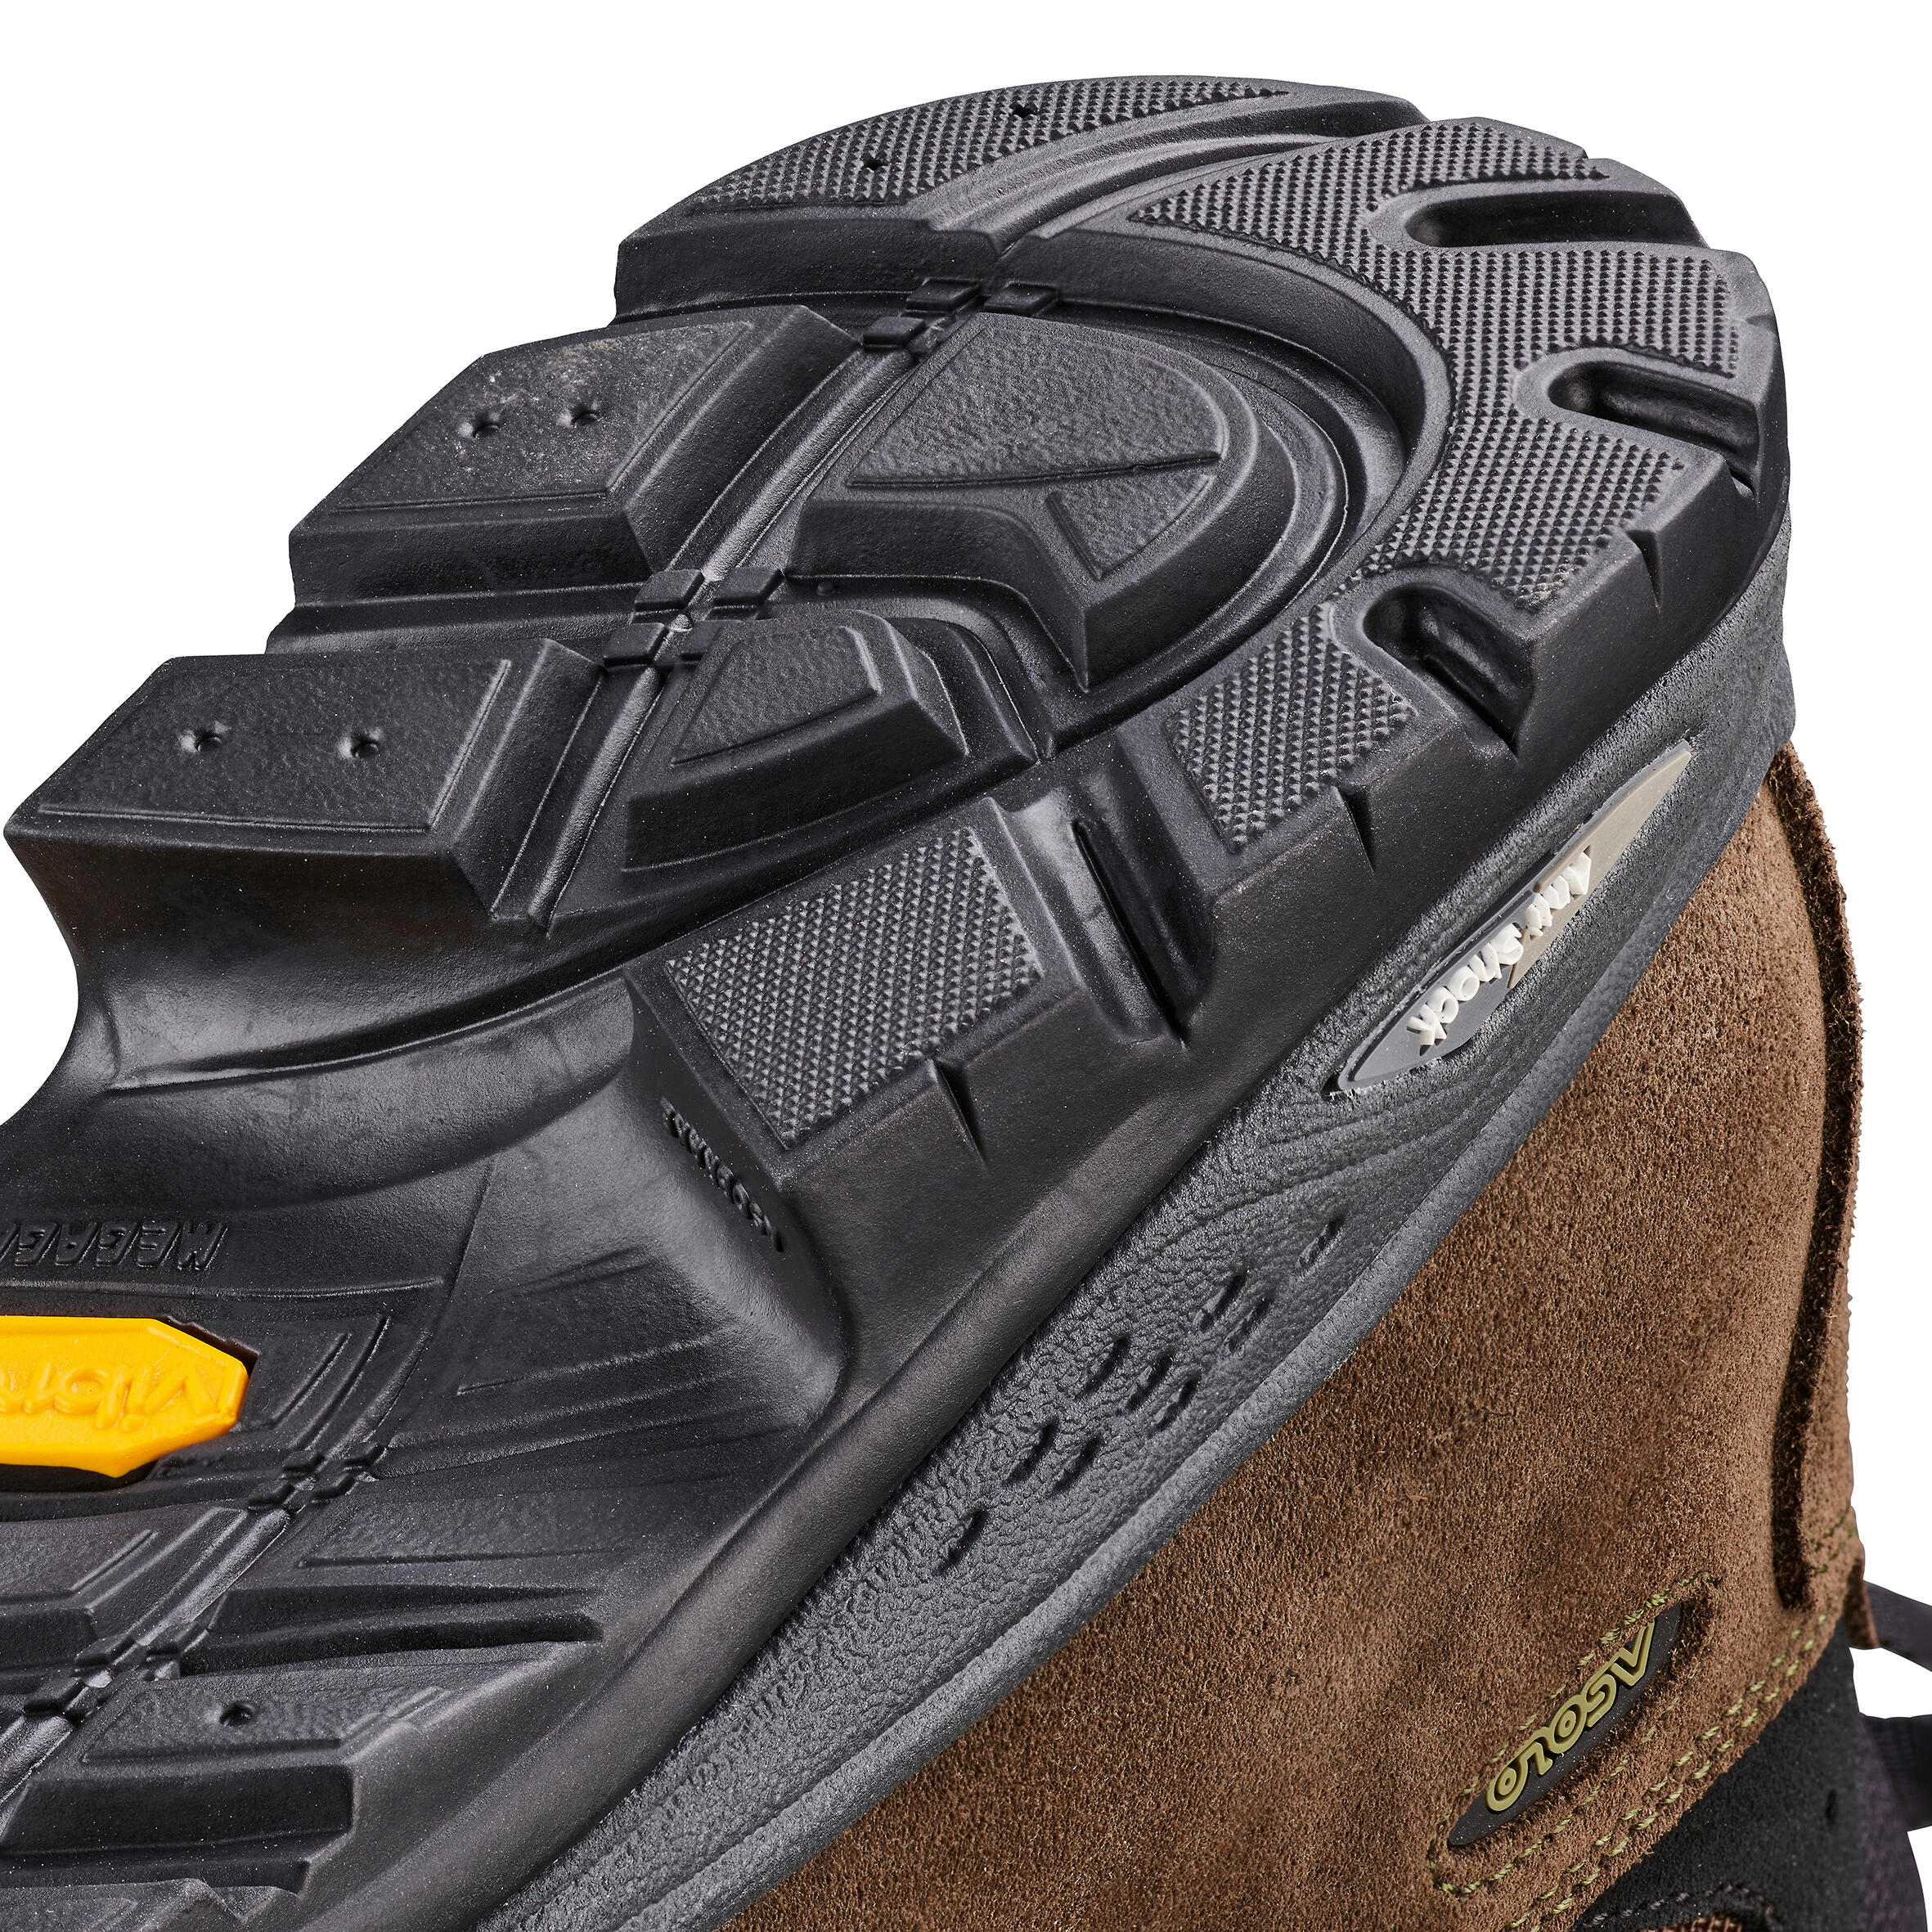 Waterproof Country Sport Boots Asolo X-Hunt Forest Gore-Tex Vibram 14/14